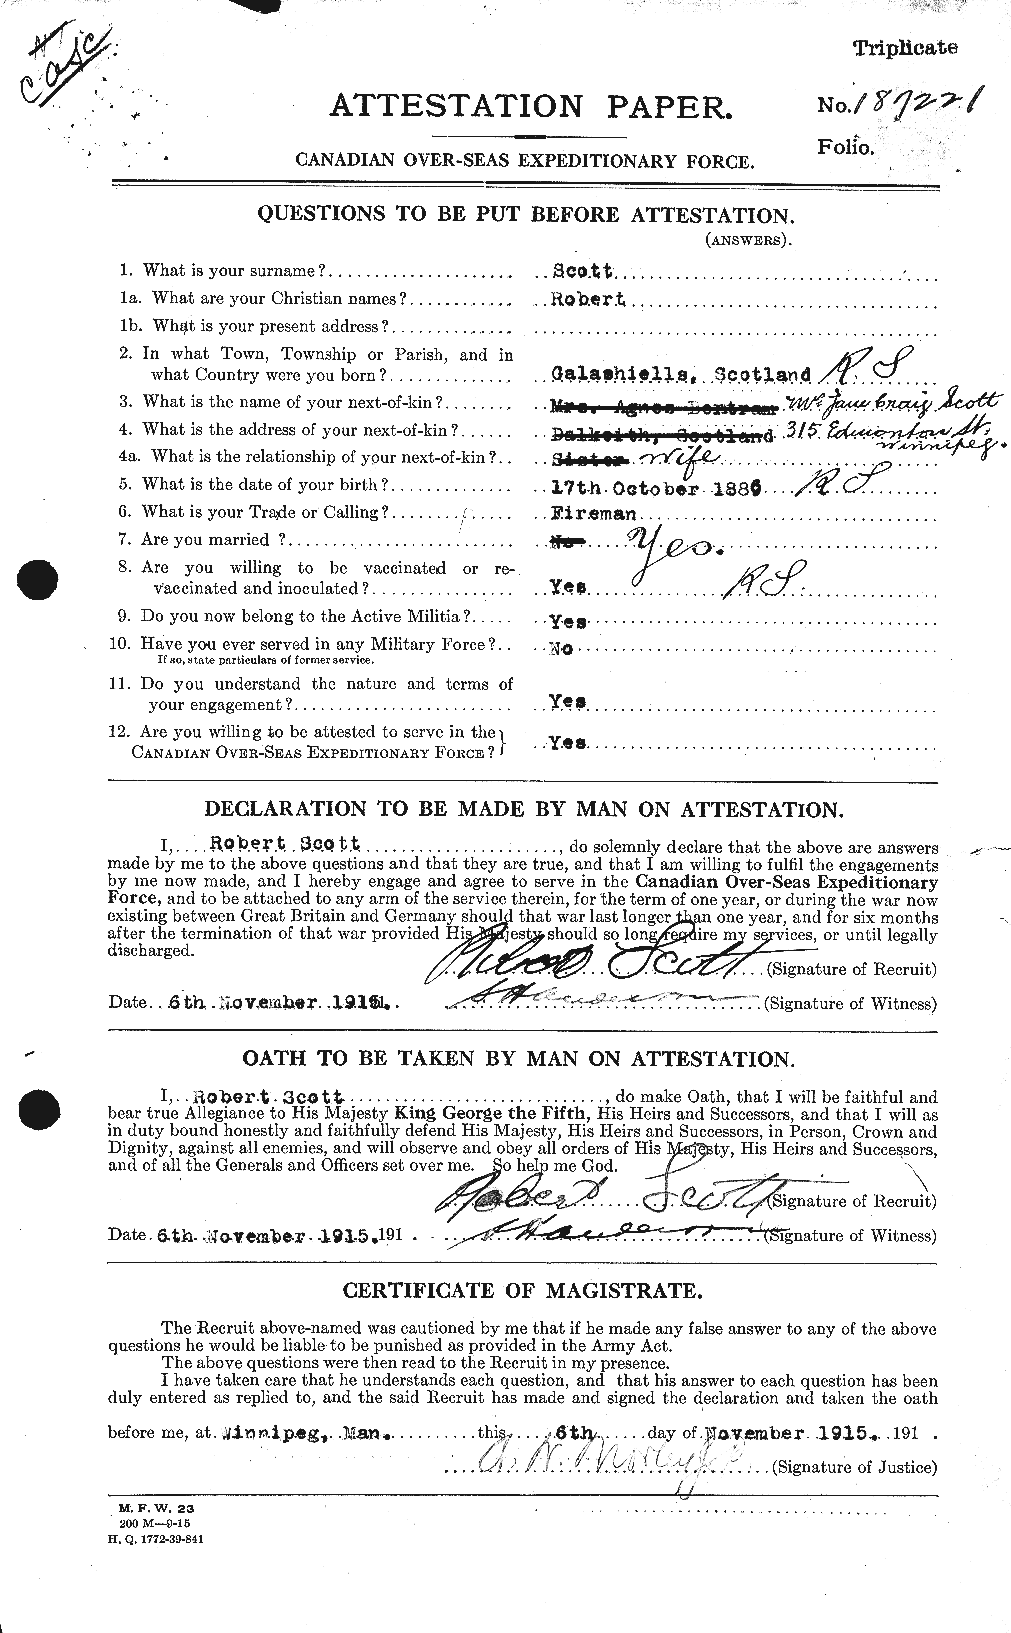 Personnel Records of the First World War - CEF 089233a